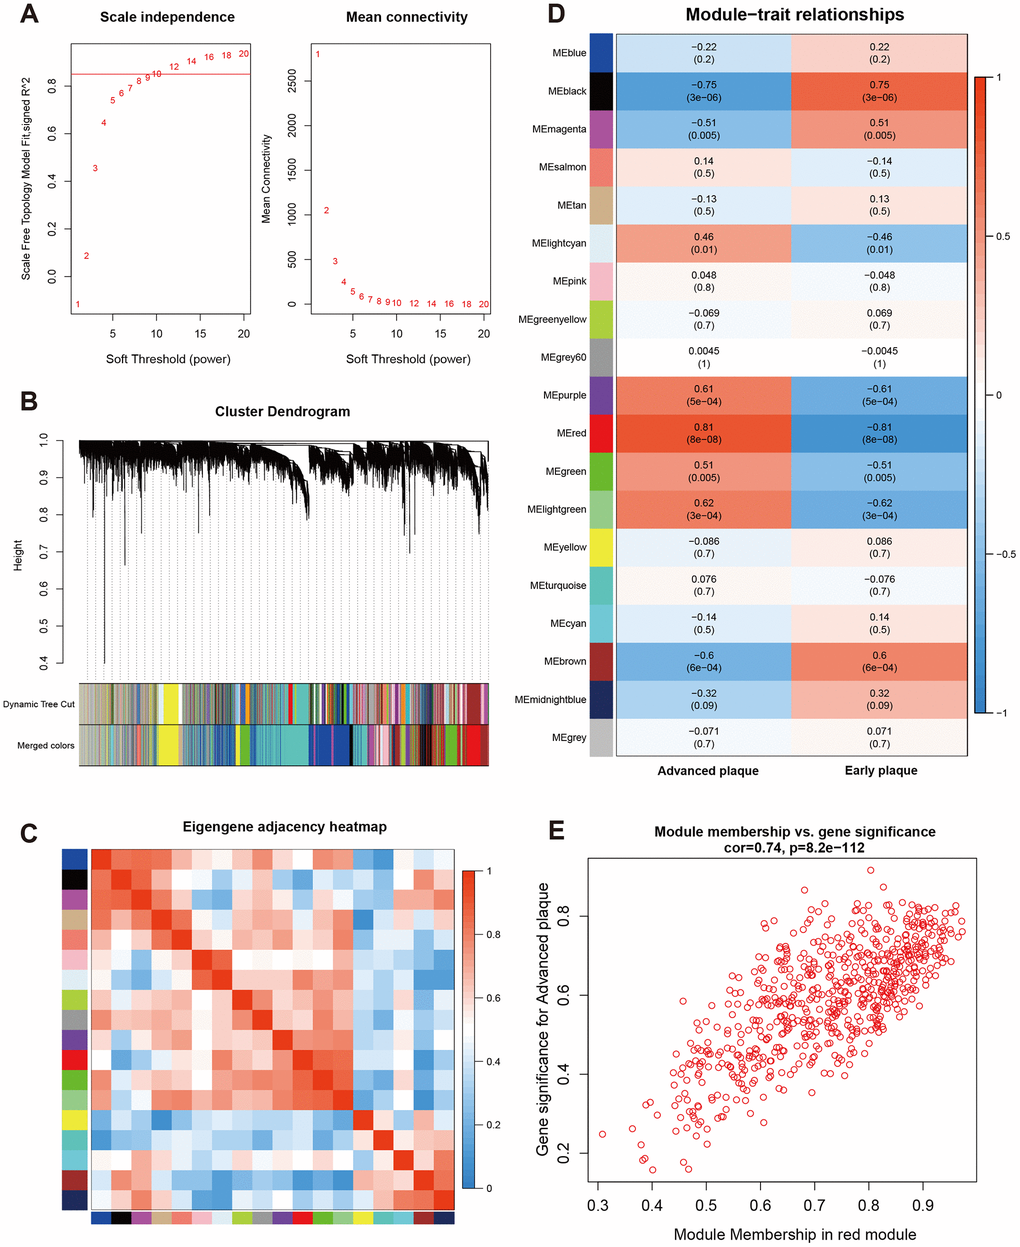 Construction of weighted co-expression network and module analysis. (A) Soft threshold selection process; (B) Cluster dendrogram. Each color represents one specific co-expression module. In the colored rows below the dendrogram, the two colored rows represent the original modules and merged modules; (C) Eigengene adjacency heatmap of different modules; (D) Heatmap of the correlation between status (advanced and early plaque) and module eigengenes. Each row corresponds to a module eigengene, and each column corresponds to a trait. Each cell contains the corresponding correlation (first line) and P-value (second line). The table is color-coded by correlation according to the color legend. P-value E) Correlation between module membership of Red module and gene significance with advanced plaque (absolute value).